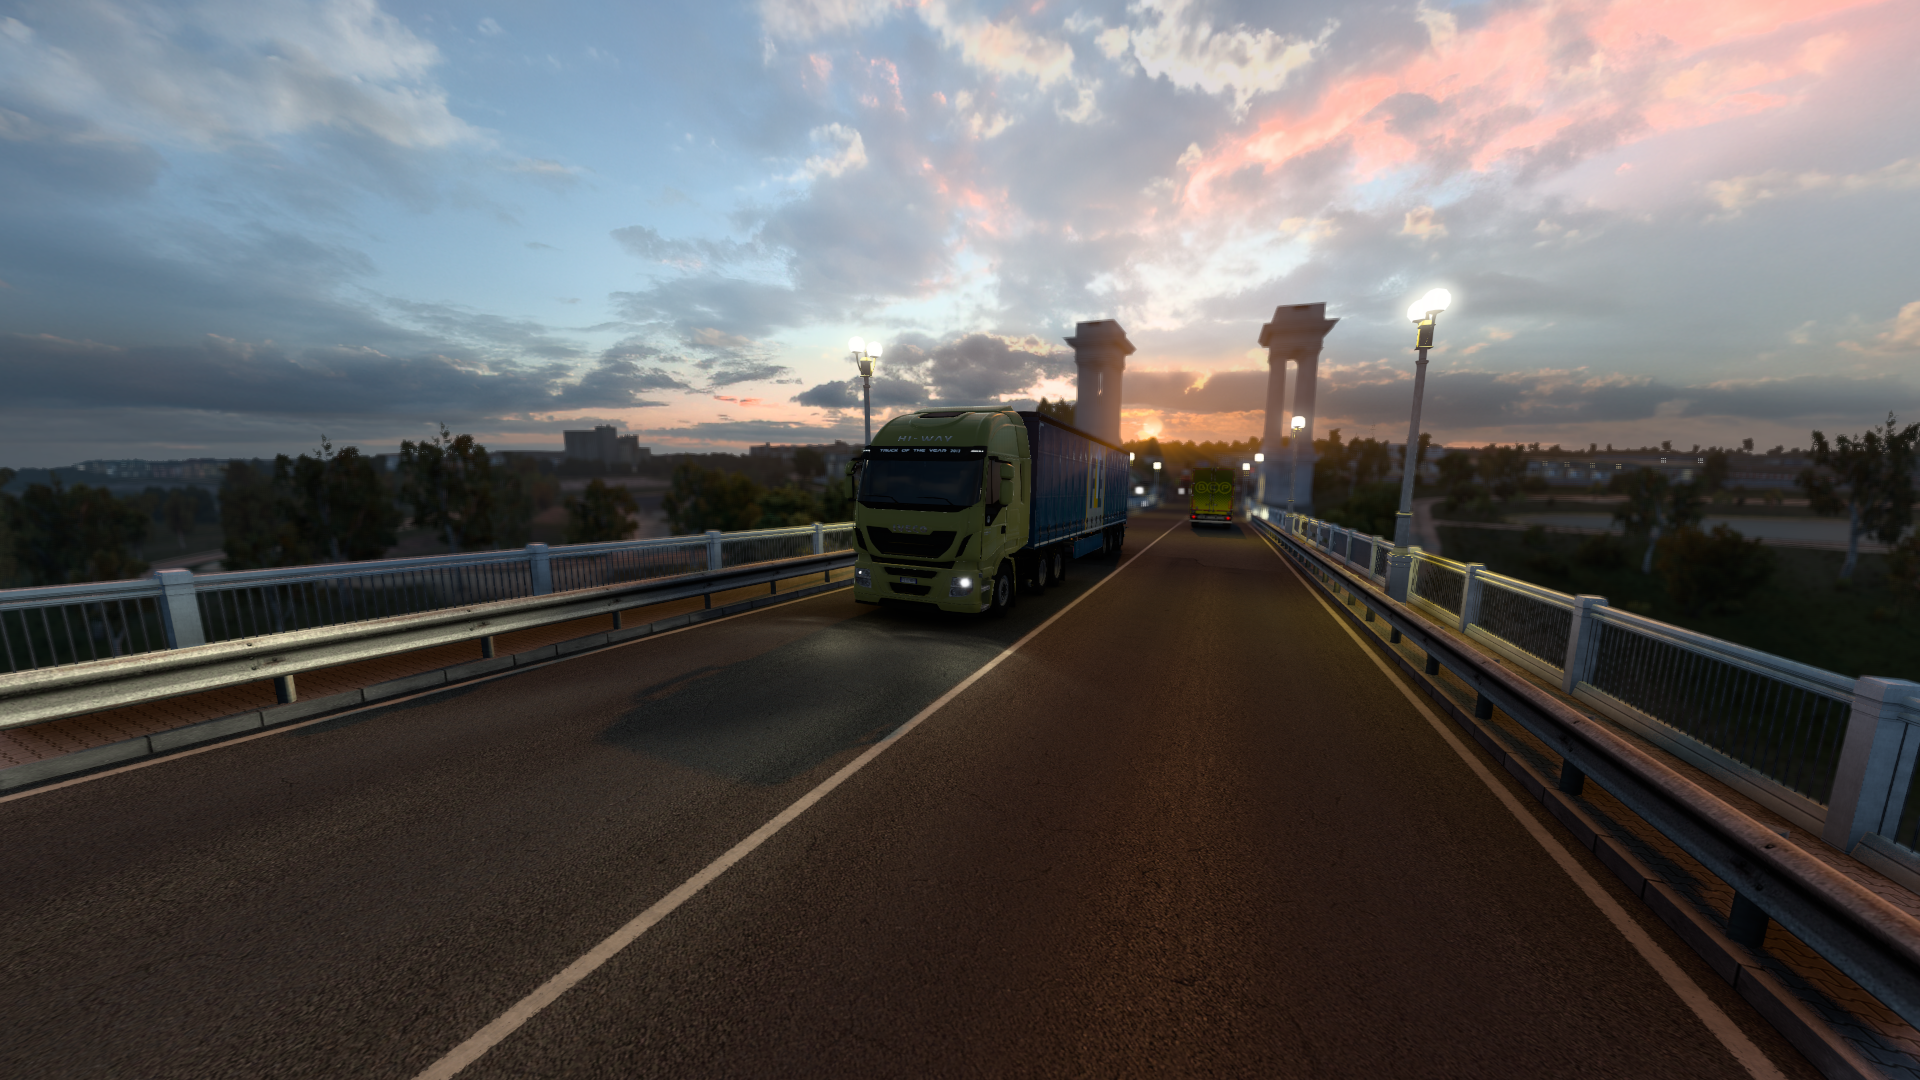 ets2_20210228_000310_00.png